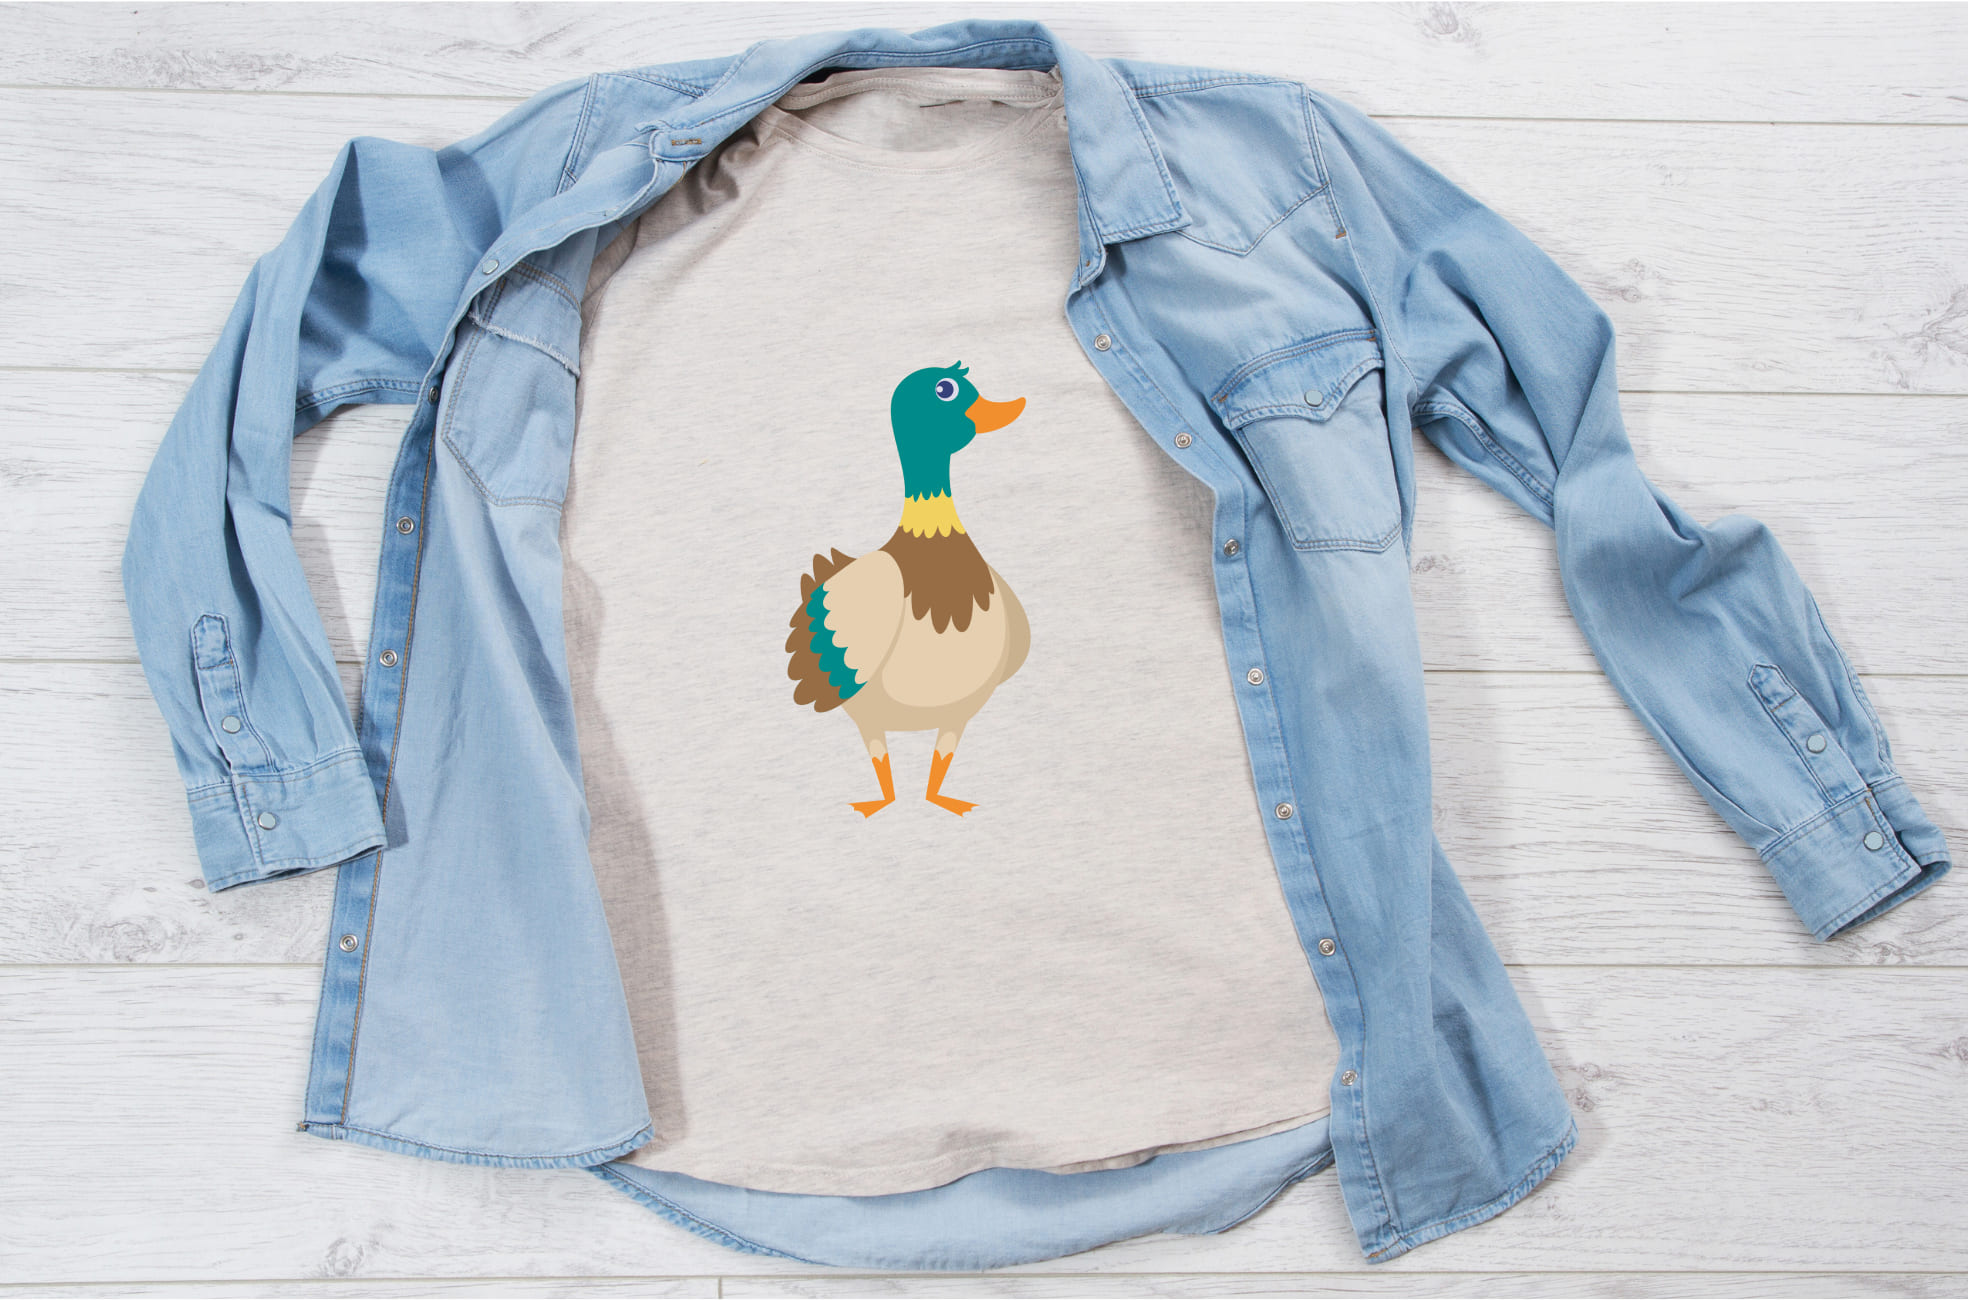 Image of white t-shirt with elegant flying duck print.